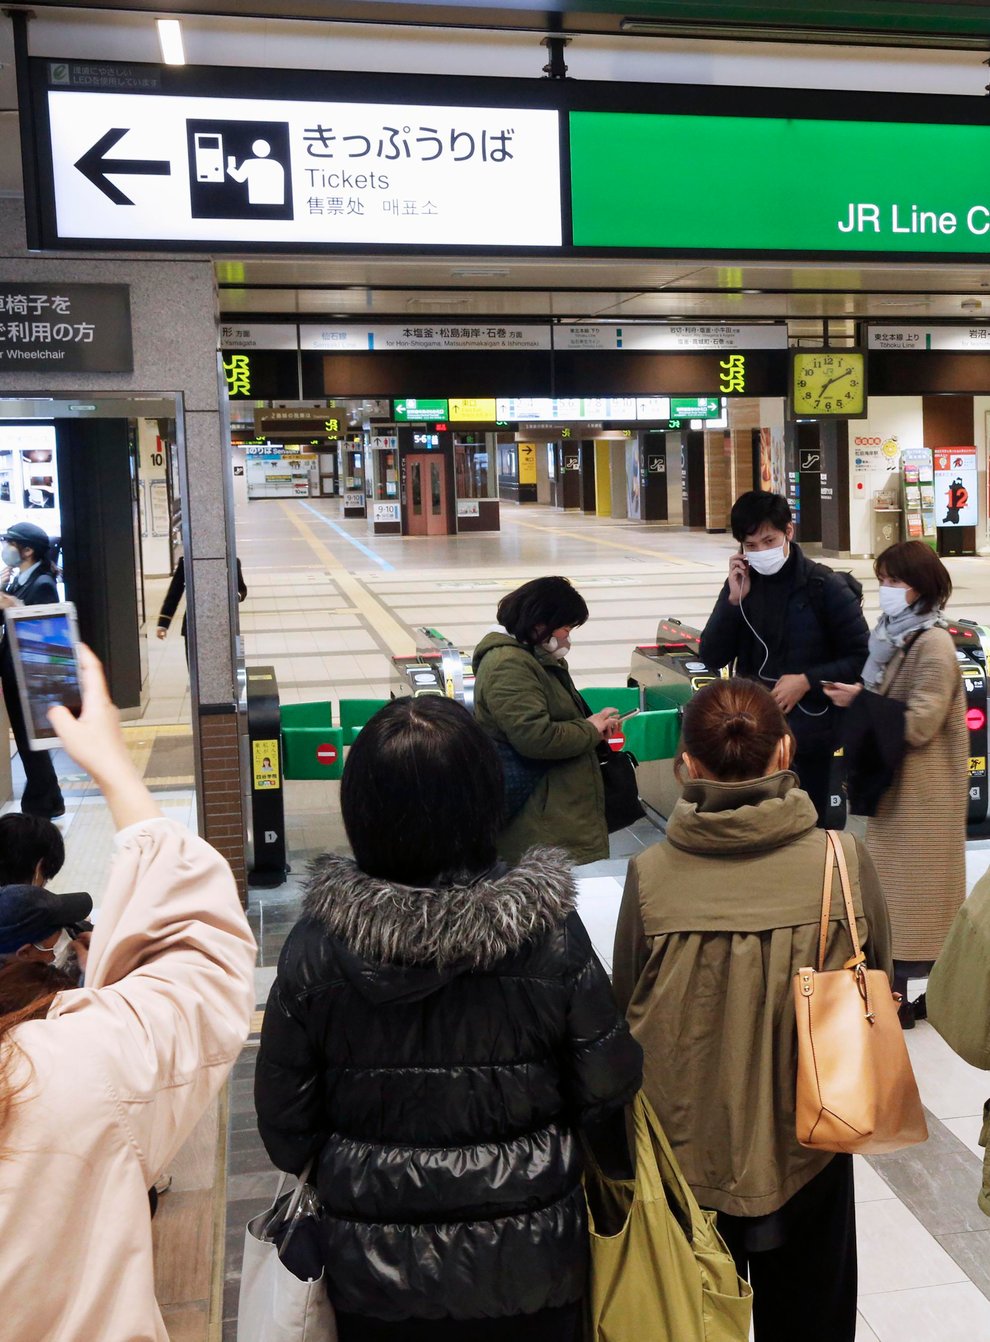 People at a train station after the quake in Japan